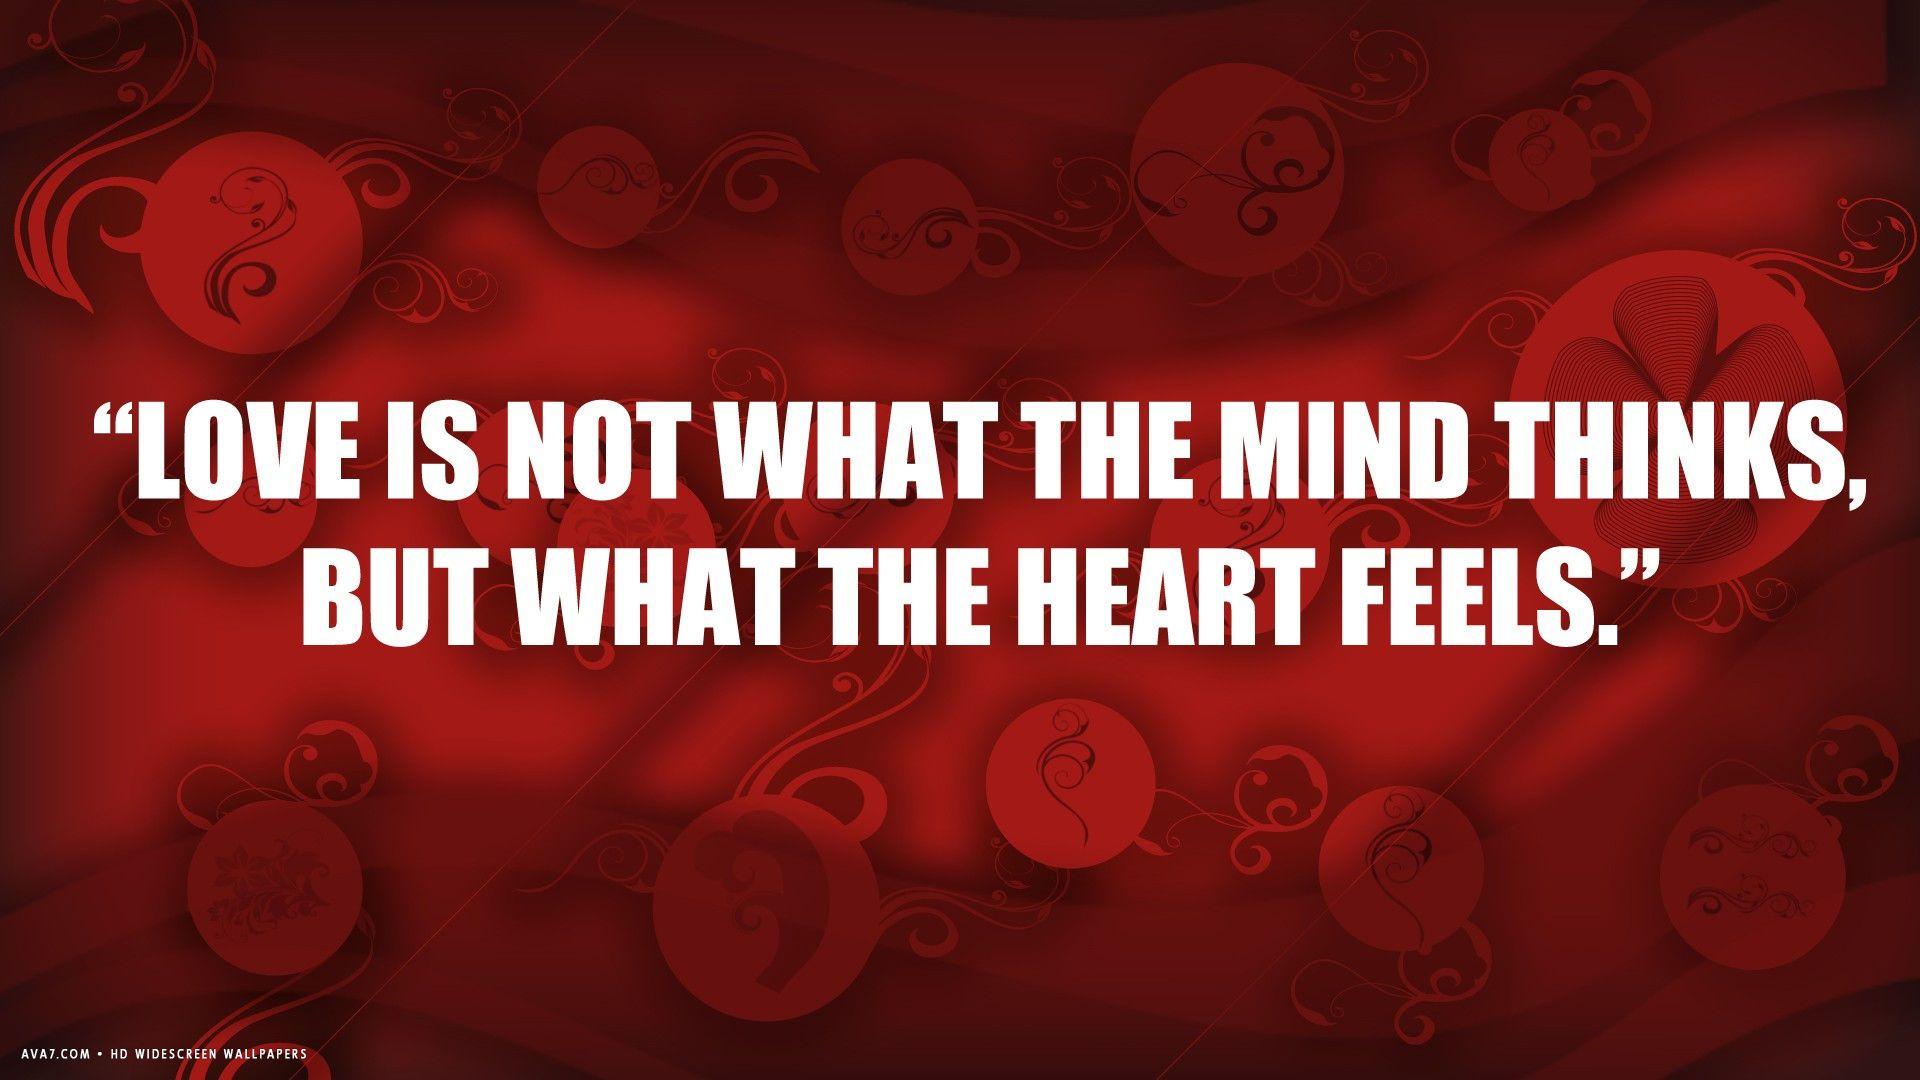 love quote what heart feels red HD widescreen wallpaper / romantic